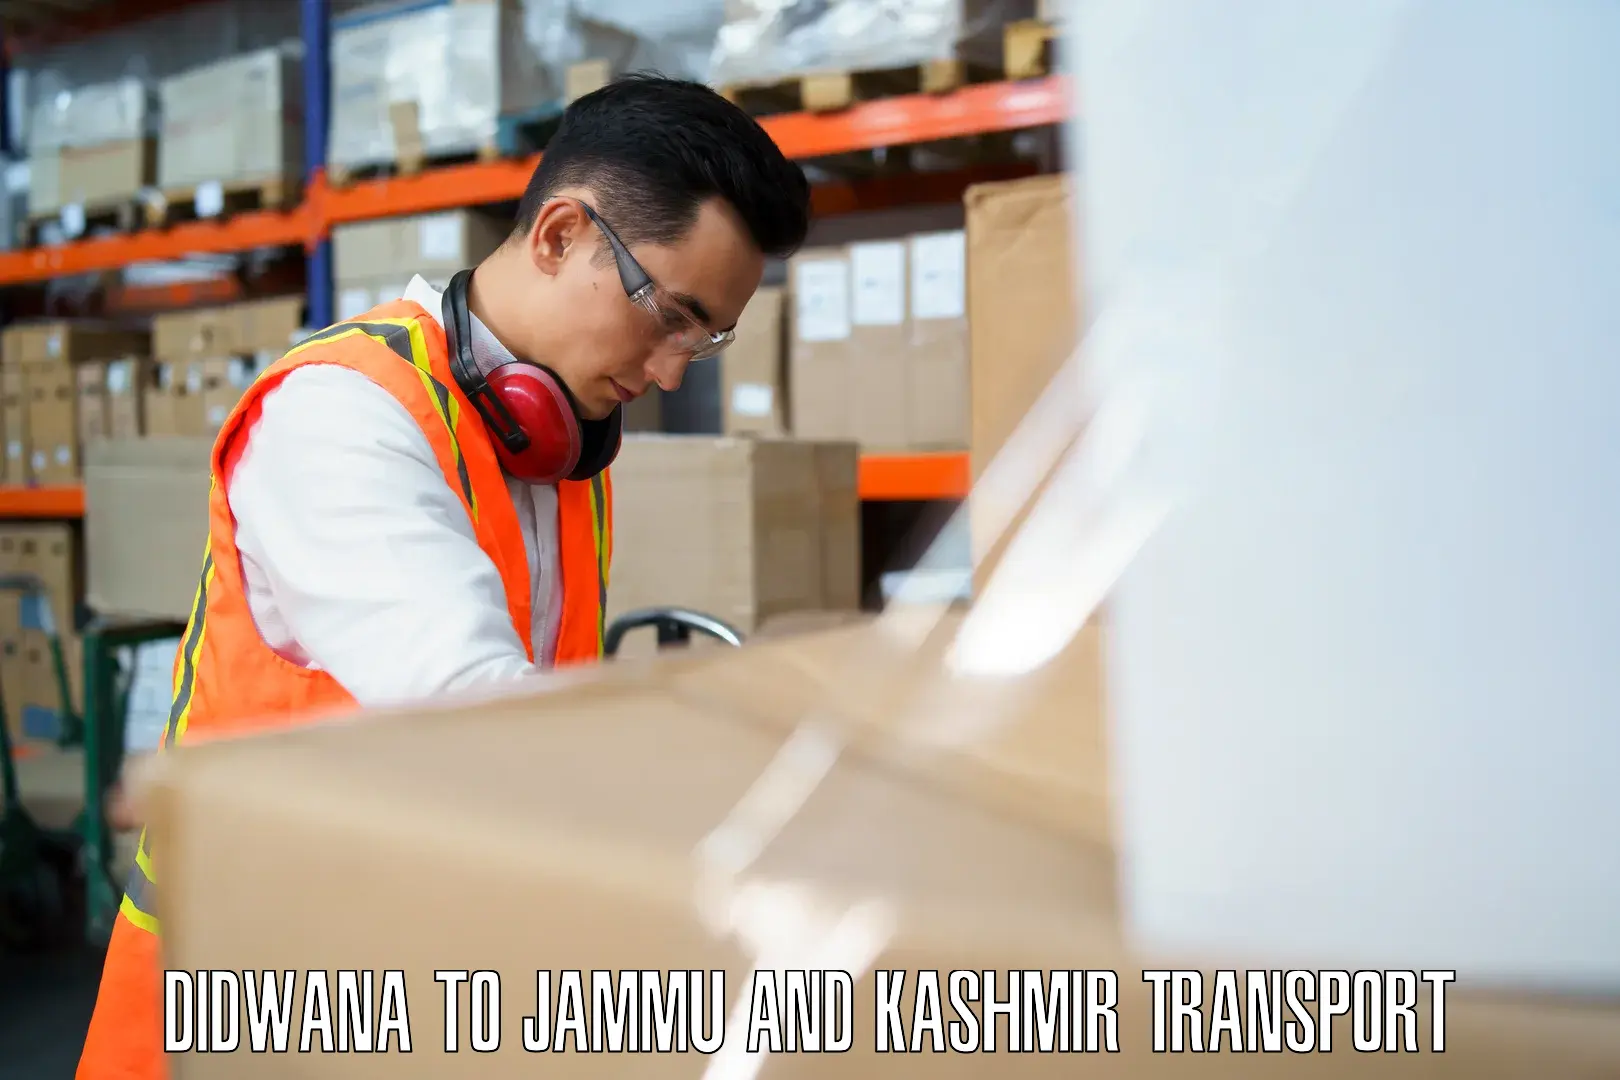 Delivery service Didwana to Jammu and Kashmir